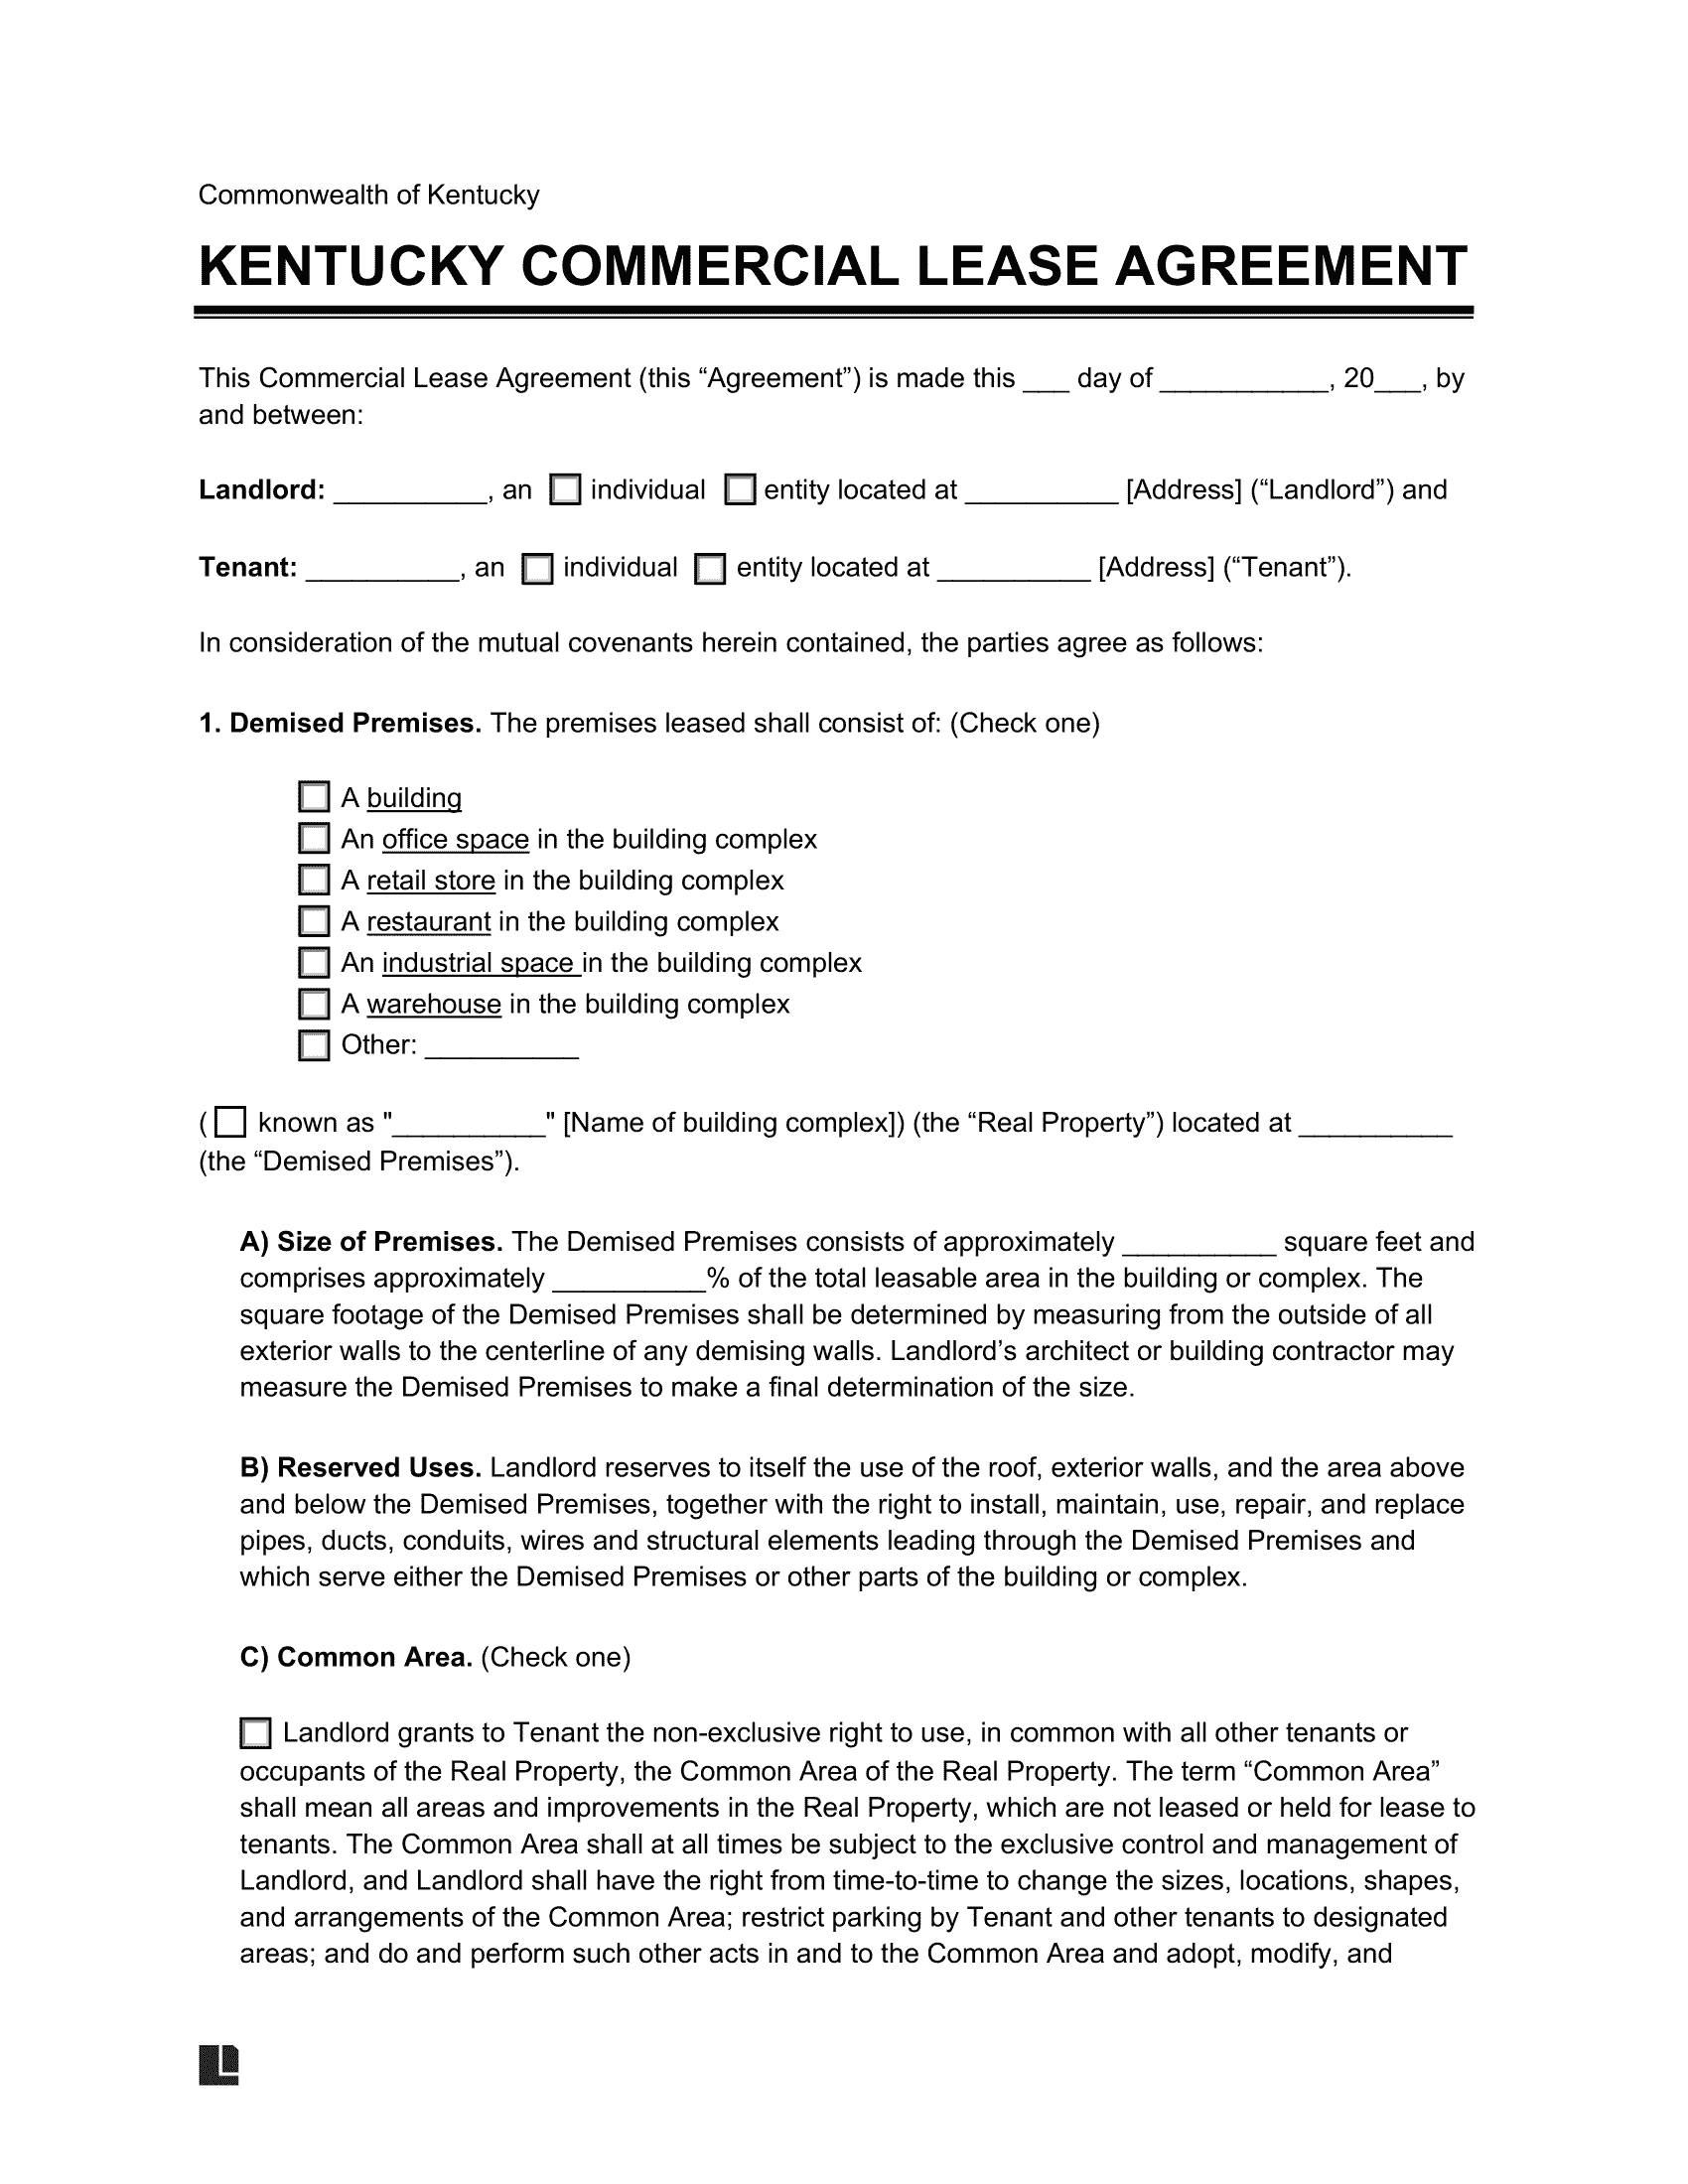 Kentucky Commercial Lease Agreement